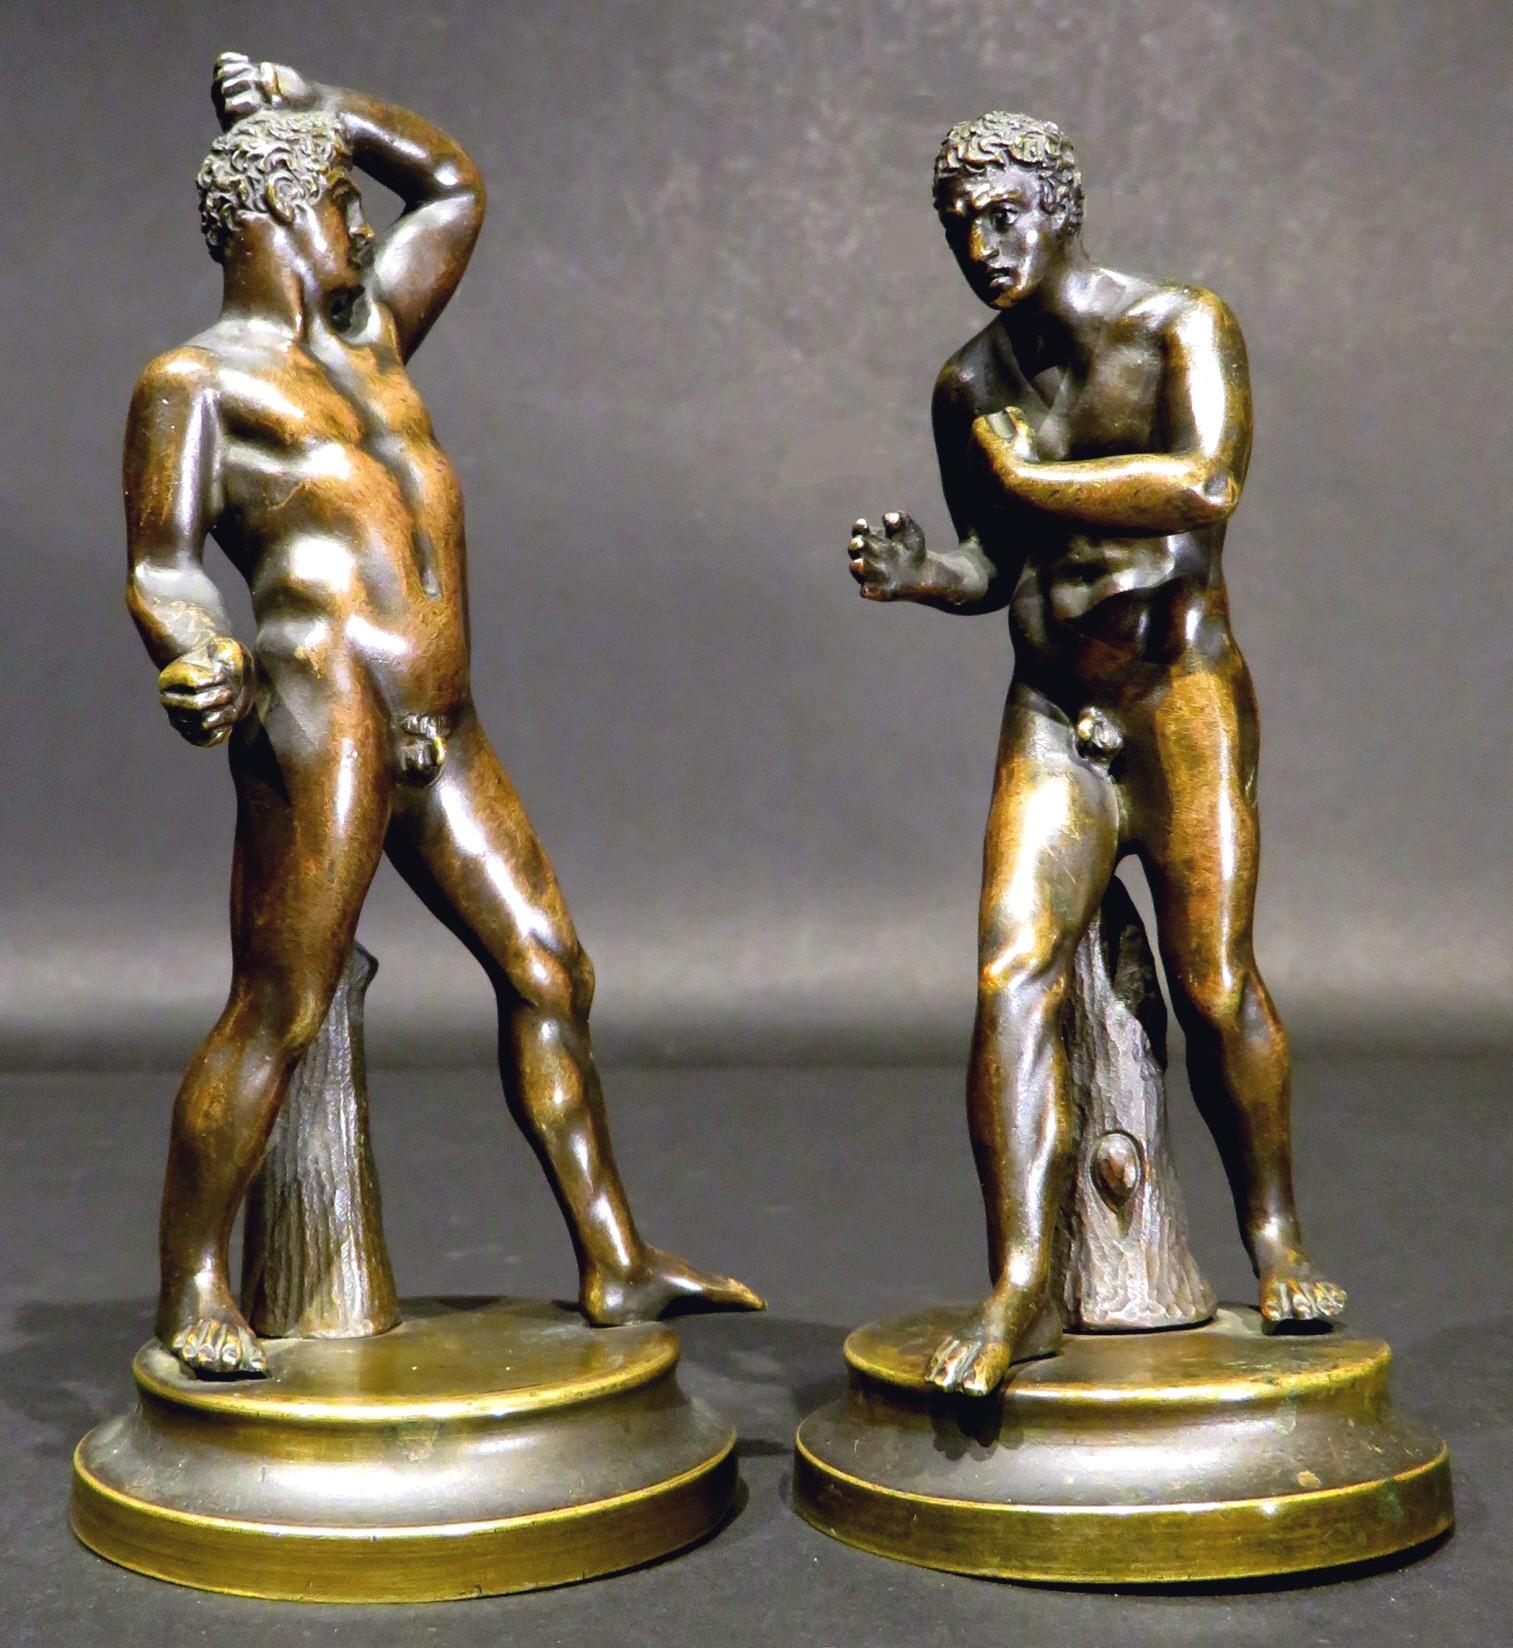 These diminutive classical bronze figures of the mythological boxers Creugas of Durres & Damoxenos of Syracuse, are after the original marble sculptures executed by Antonio Canova (1757-1822), and subsequently purchased by Pope Pius VII in 1802.